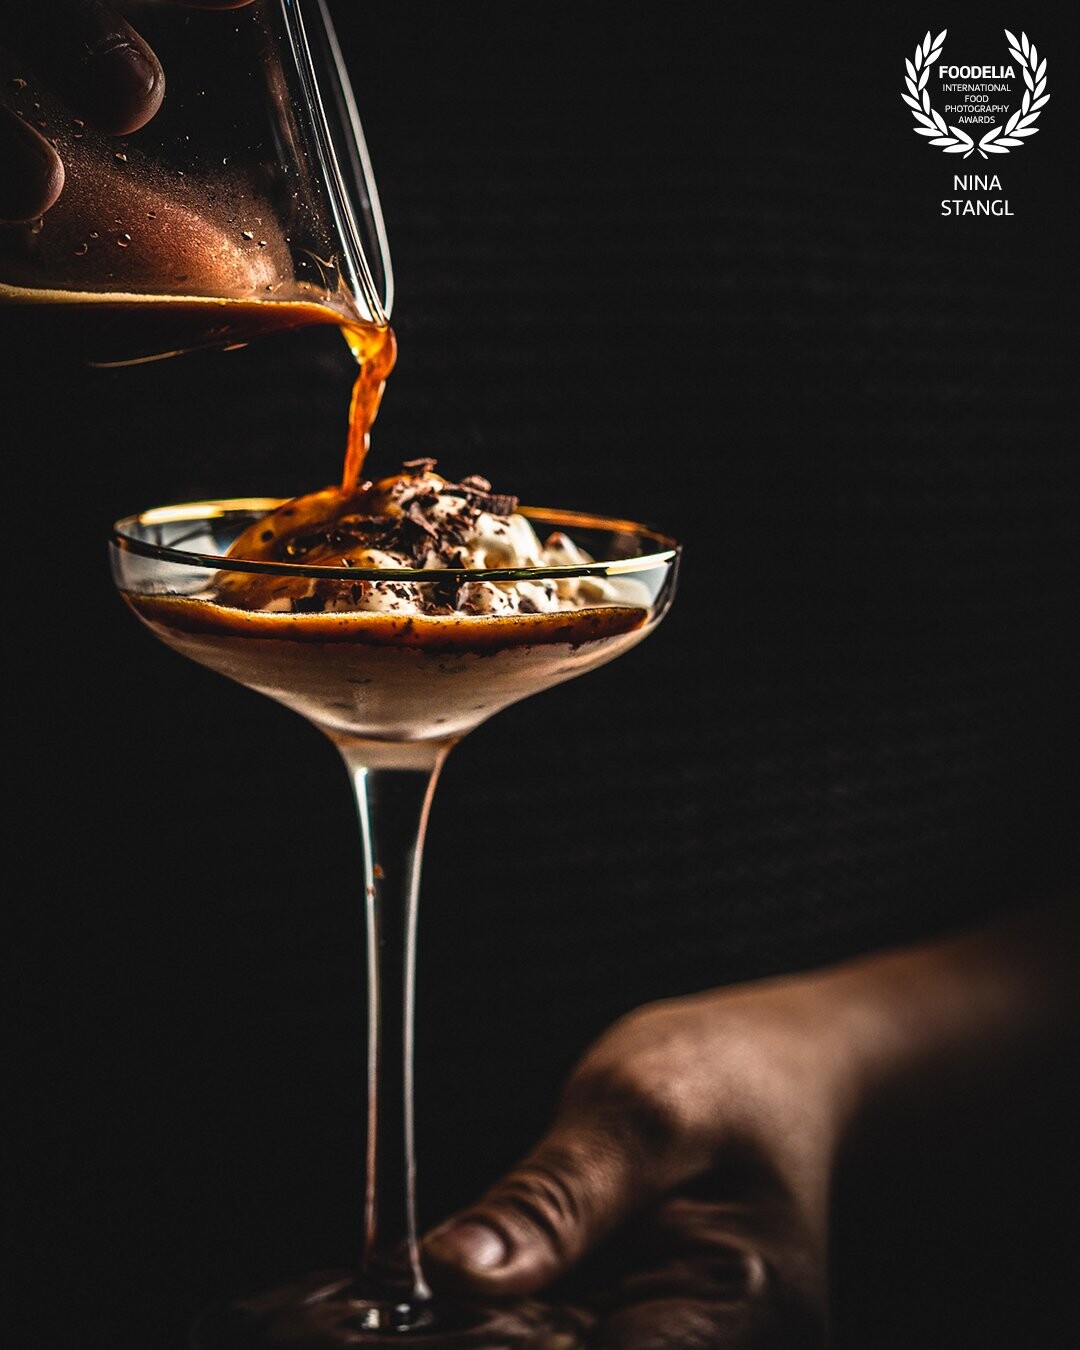 This is one of my favorite coffee desserts. It’s a delicious  affogato al caffe  . I  created a warm coffee colored mood and used negative space, my hands and the high cocktail glass as leading lines.